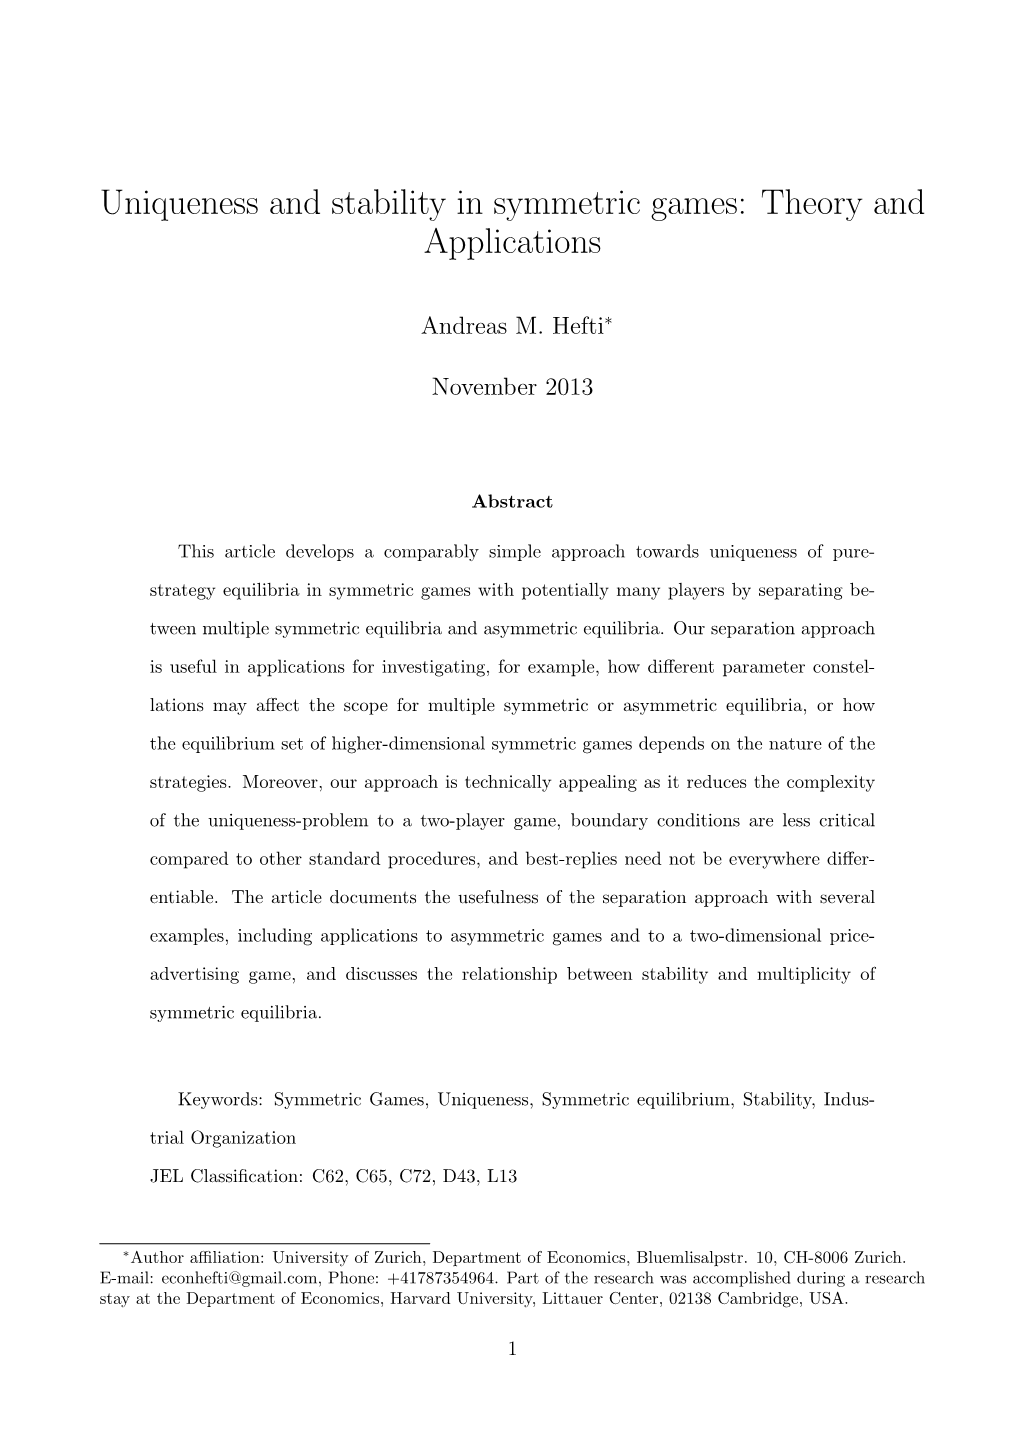 Uniqueness and Stability in Symmetric Games: Theory and Applications